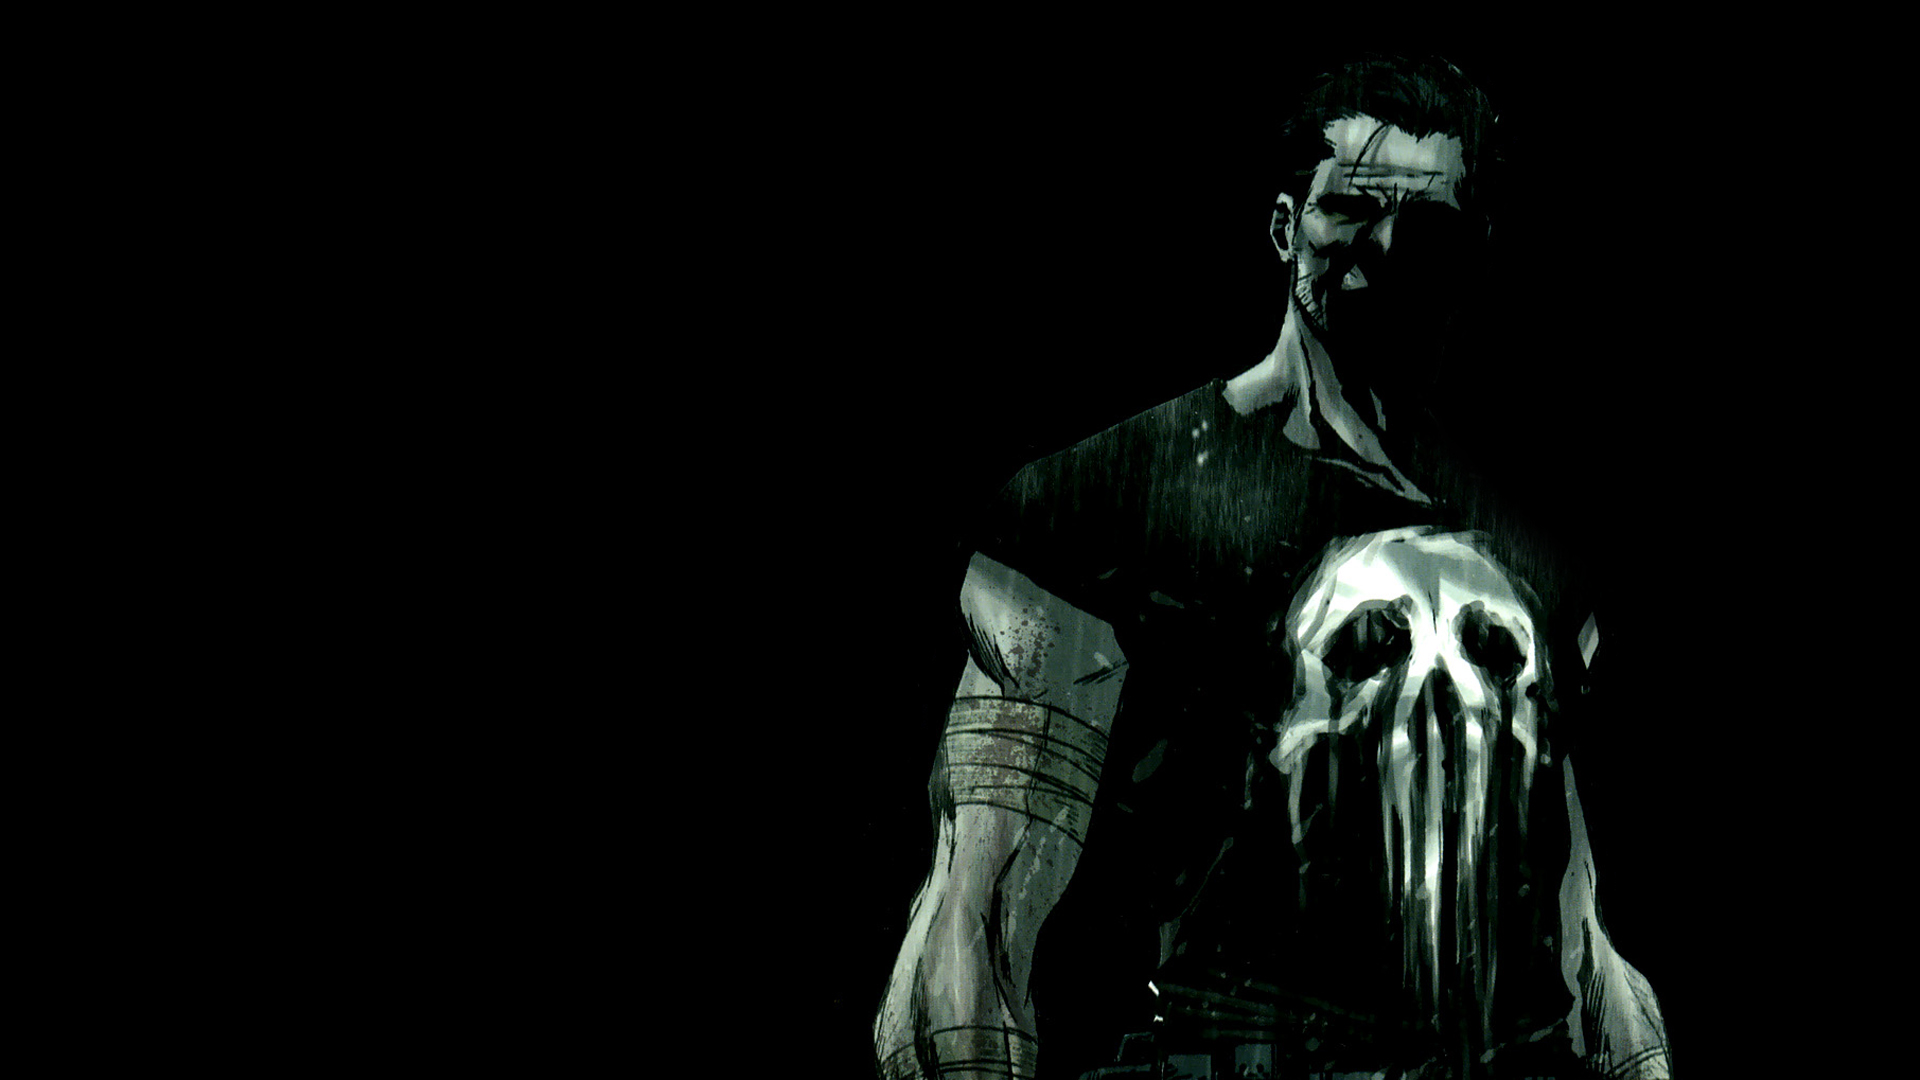 Cool Punisher Wallpapers Images amp Pictures   Becuo